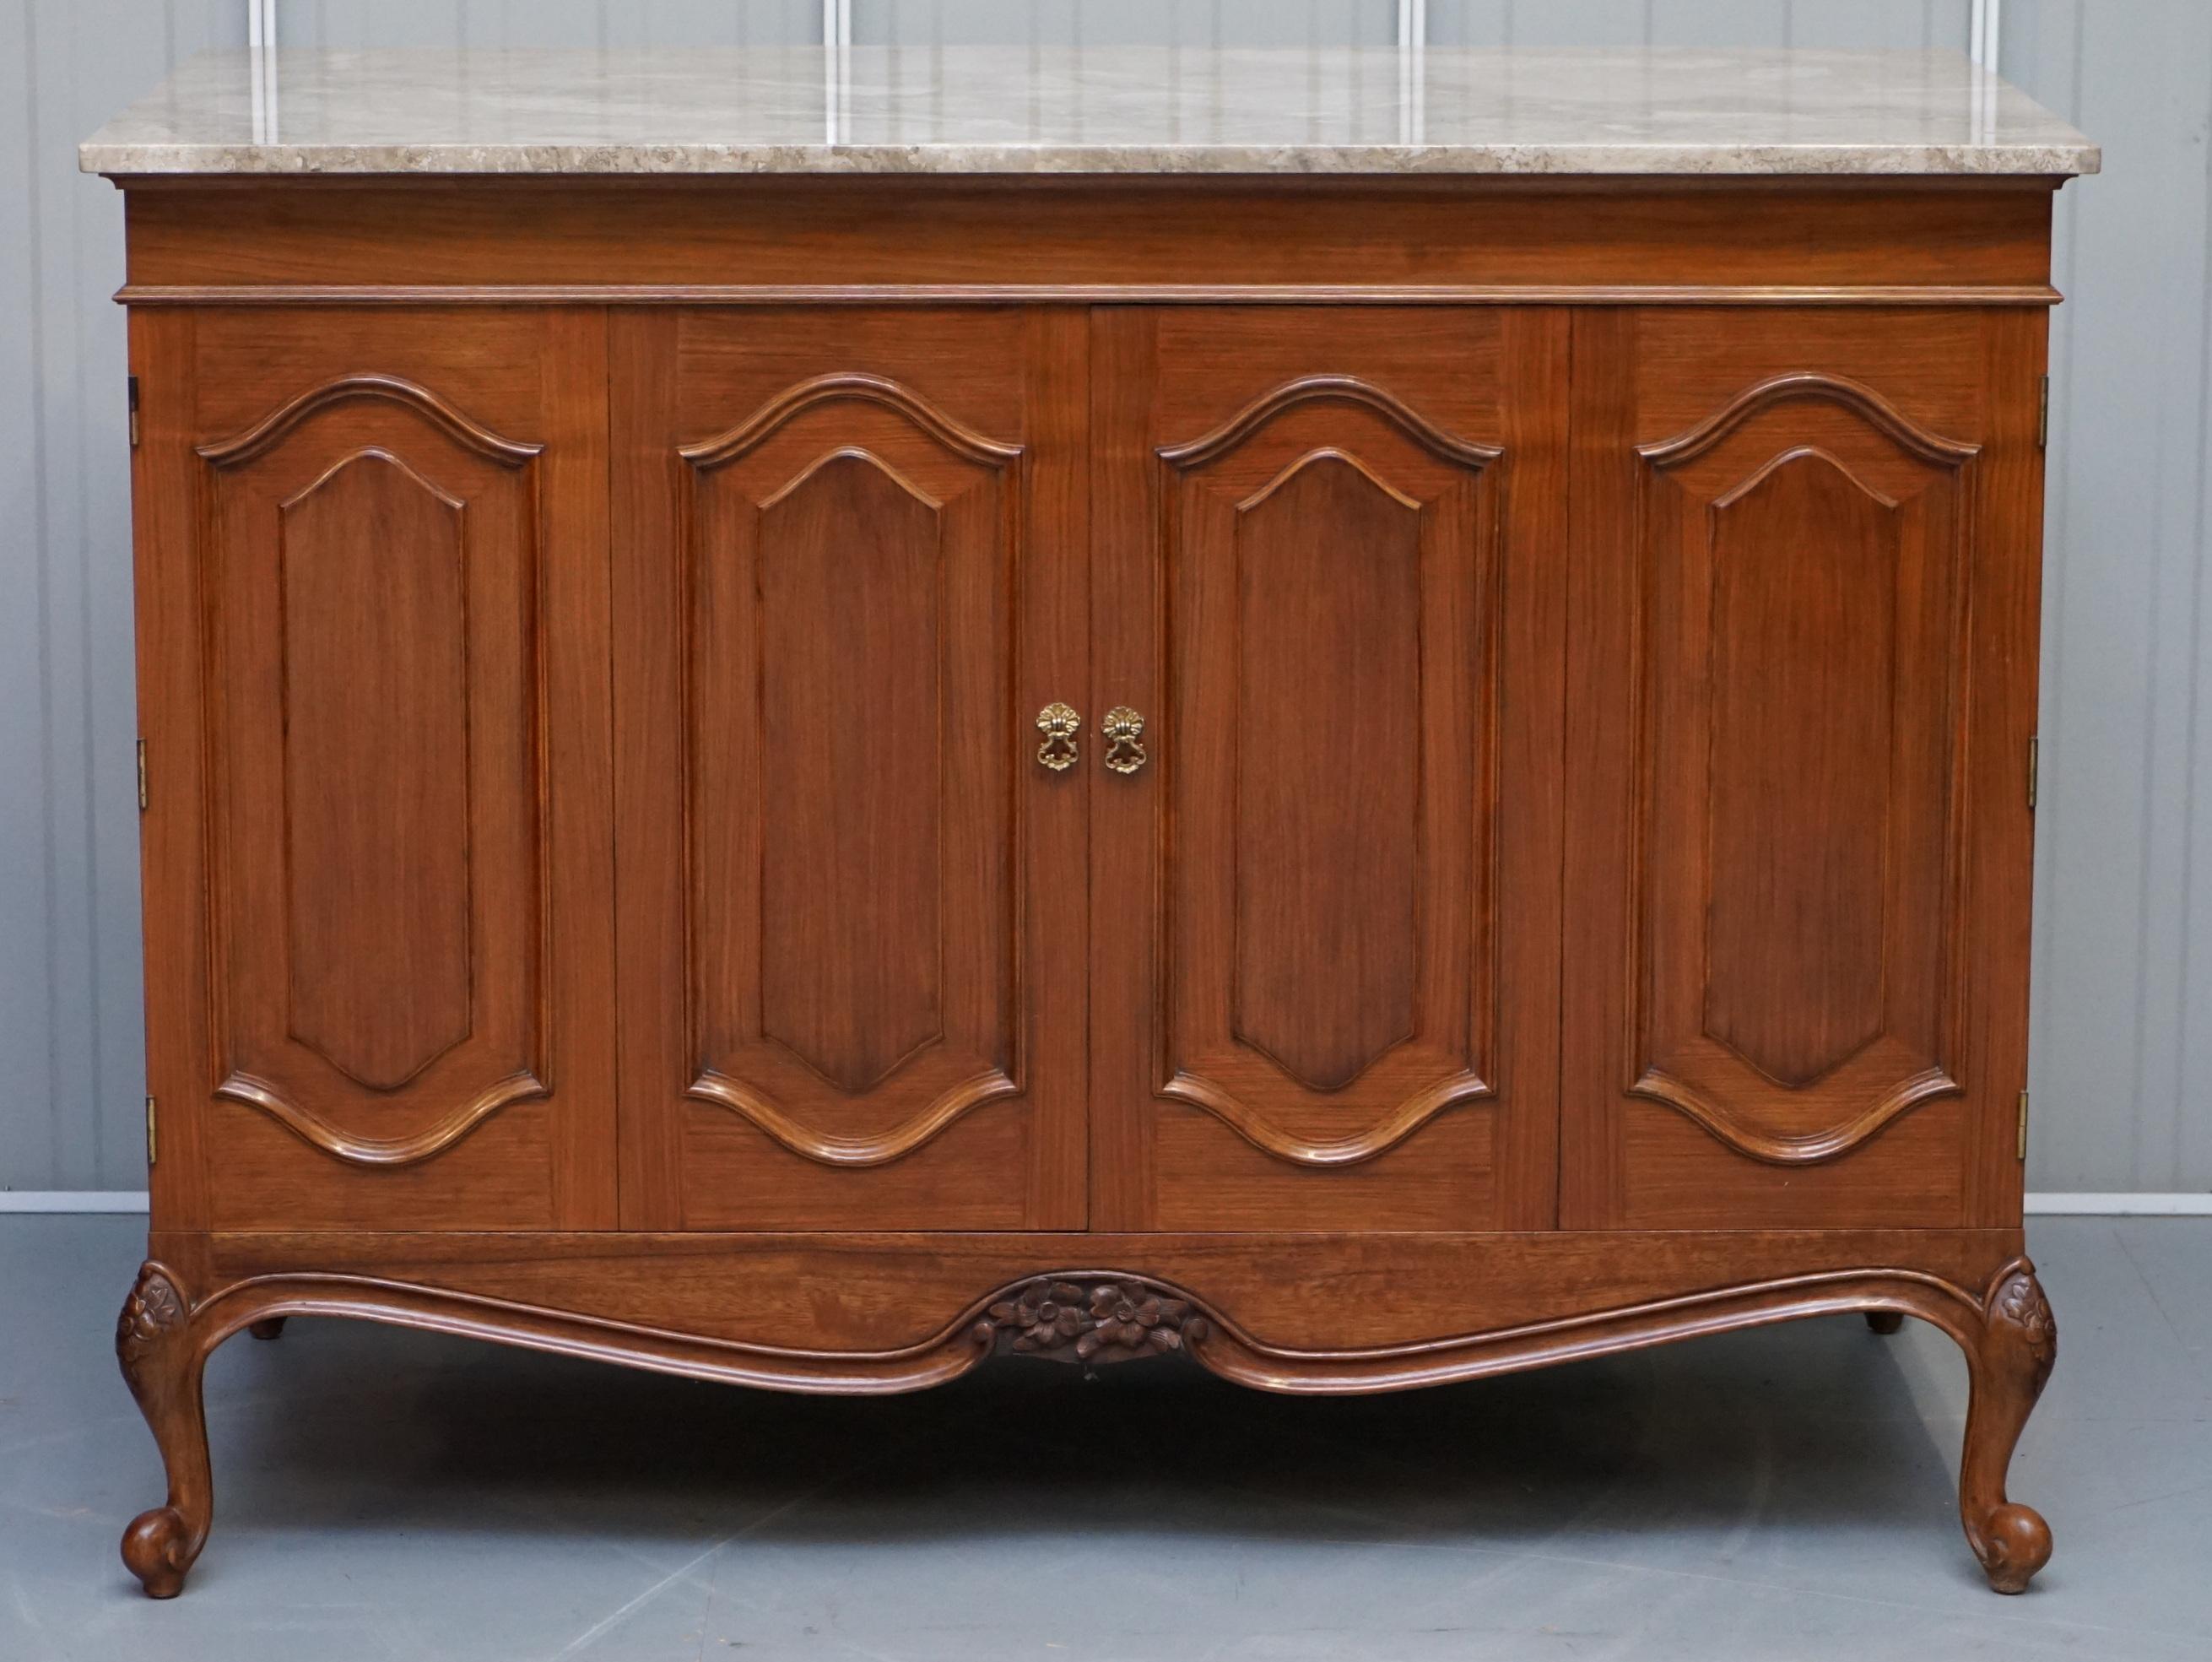 We are delighted to offer for sale this lovely French cherrywood with solid marble top and bi-folding doors media cabinet

A very well made solid piece of furniture, designed as a media cabinet for your television and or all you media boxes and